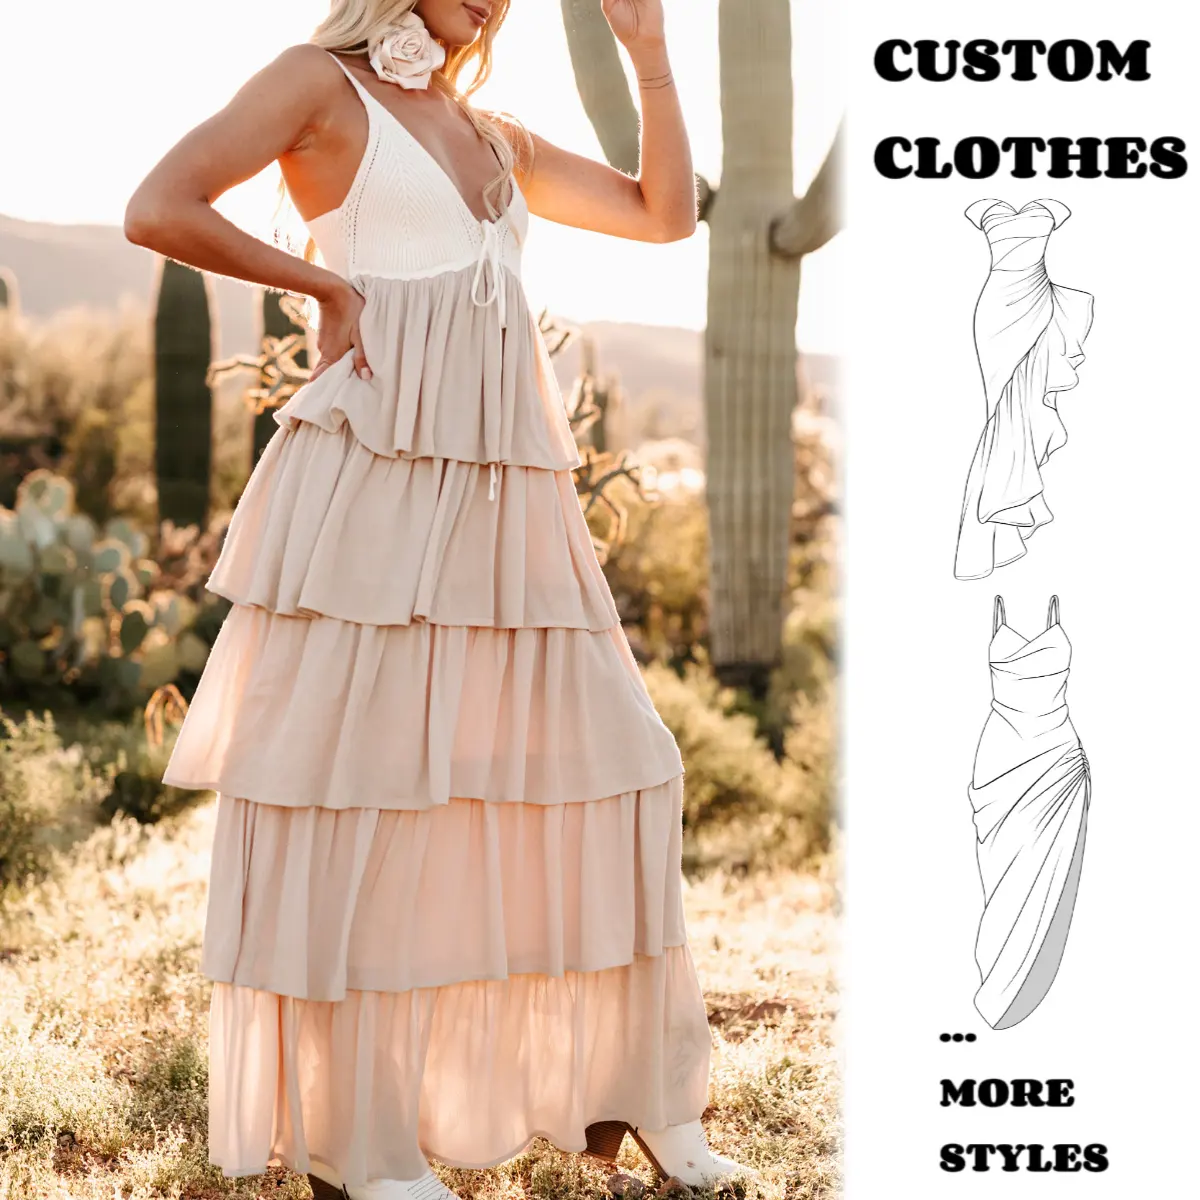 High Quality Factory Custom Fashion Women's Clothing Tiered Maxi Dress Surplice V Neck With Adjustable Straps Casual Dresses